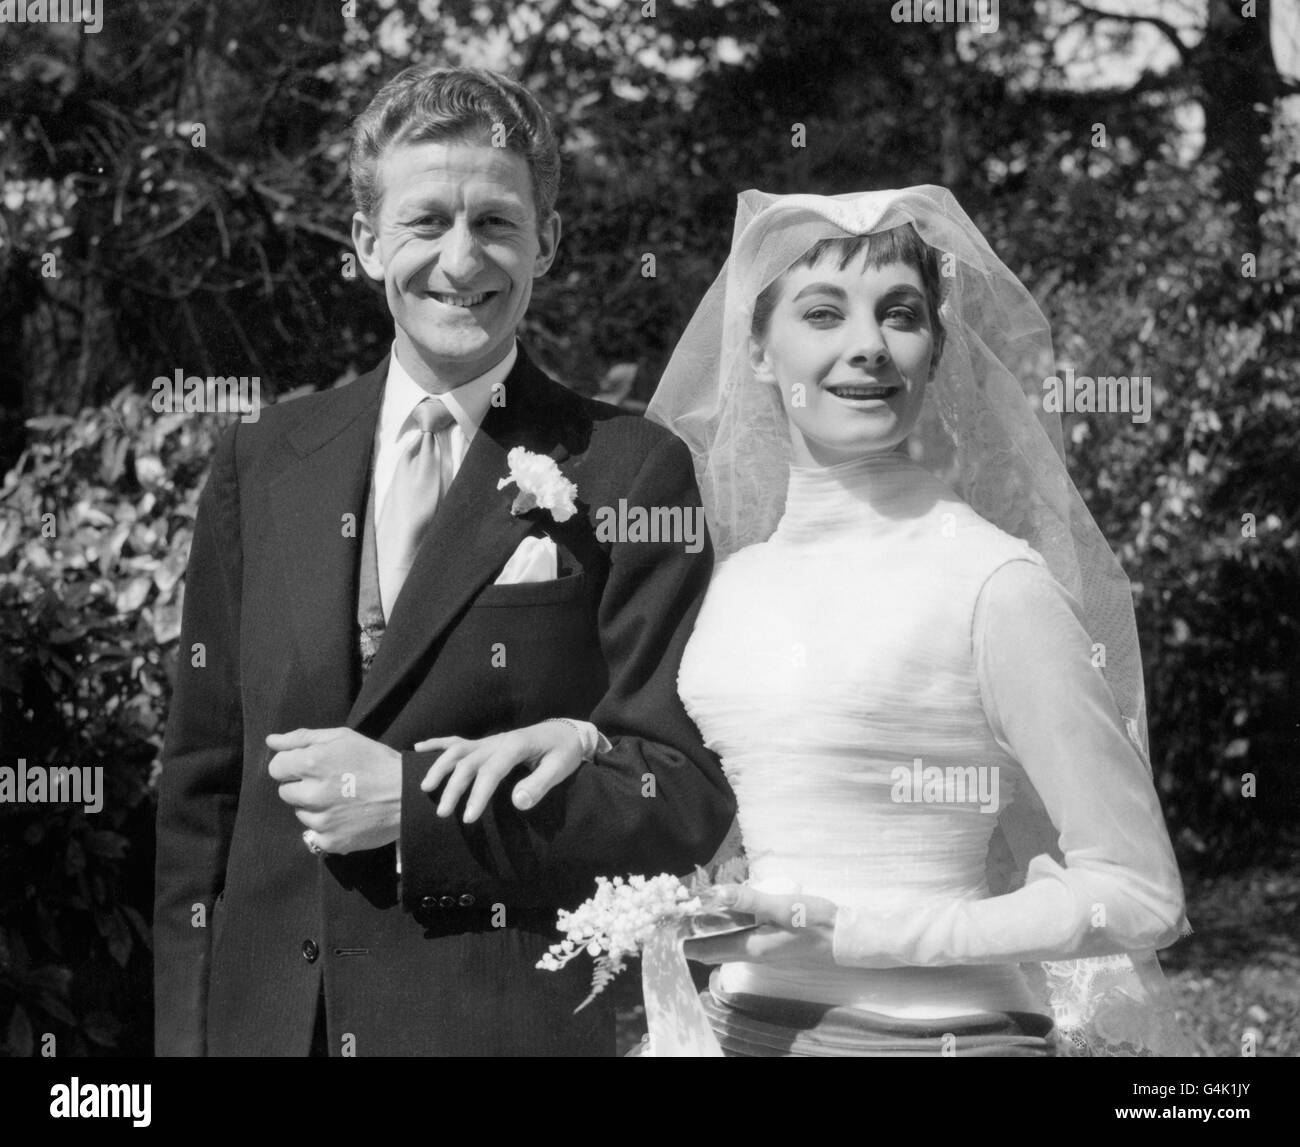 Actor Jon Pertwee, 35, and his bride, actress Jean Marsh, 20, leaving St Nicholas Church, Shepperton, after their wedding. Stock Photo